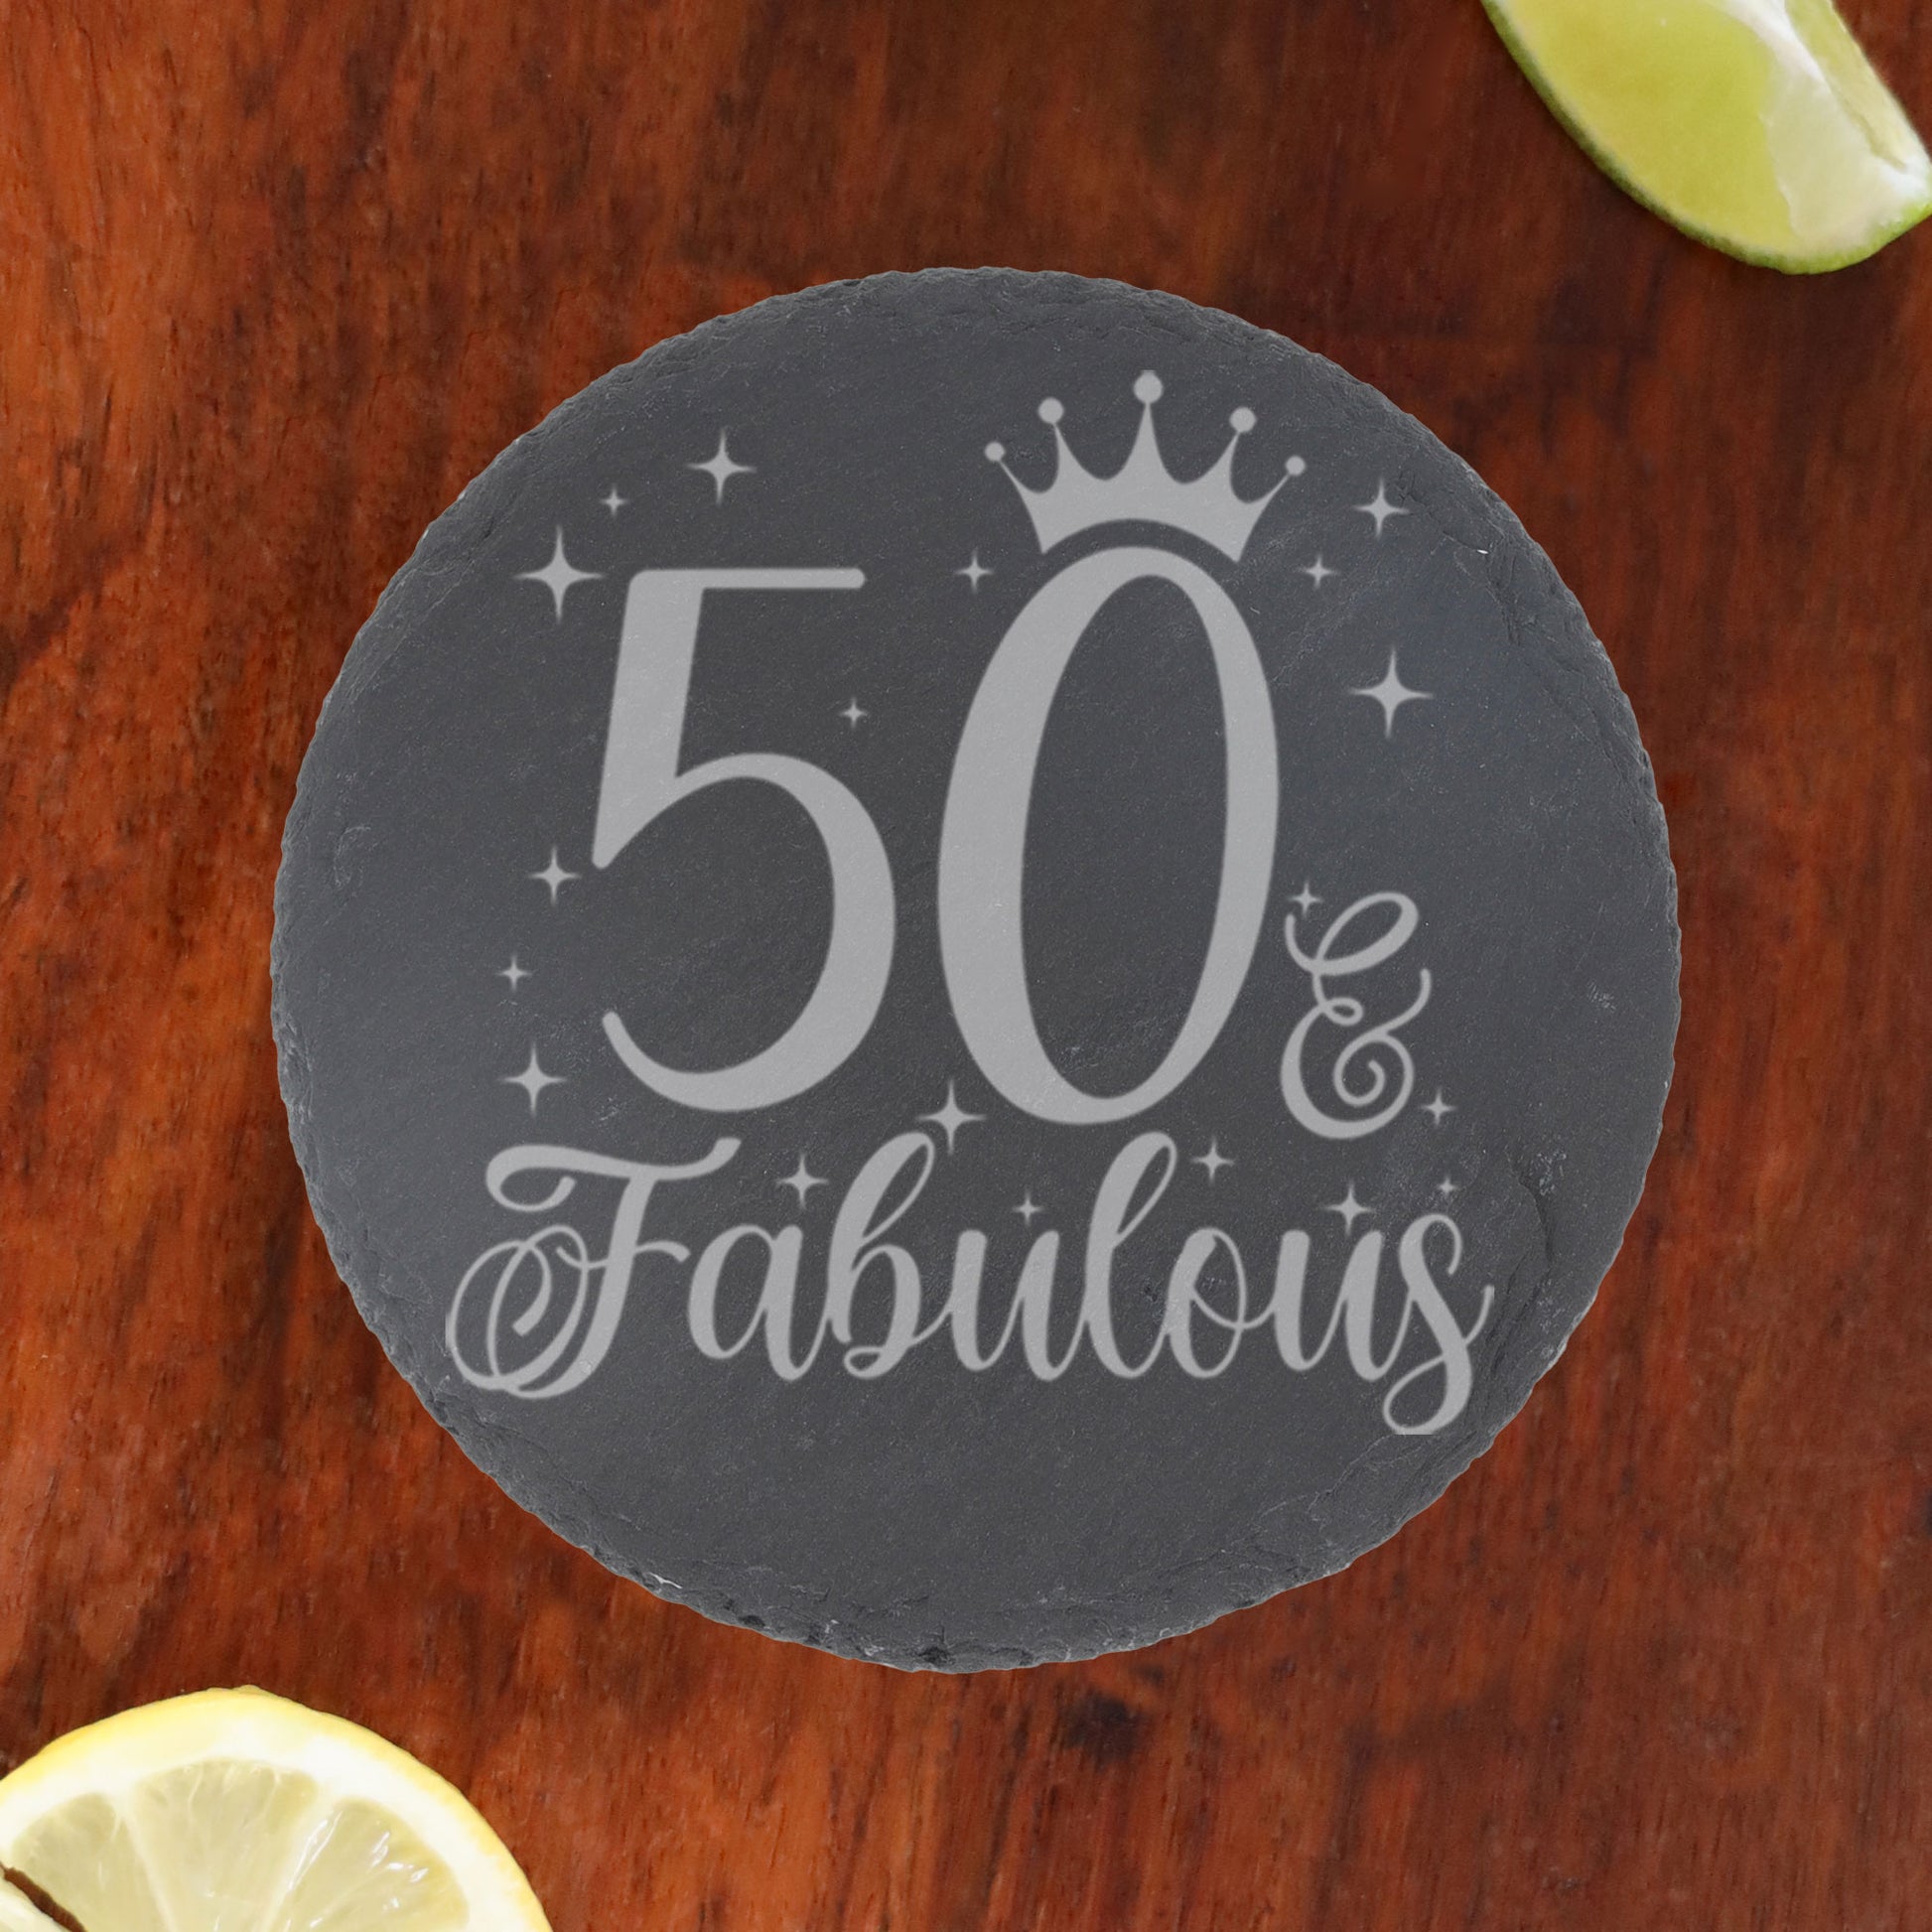 50 & Fabulous 50th Birthday Gift Engraved Wine Glass and/or Coaster Set  - Always Looking Good - Round Coaster Only  